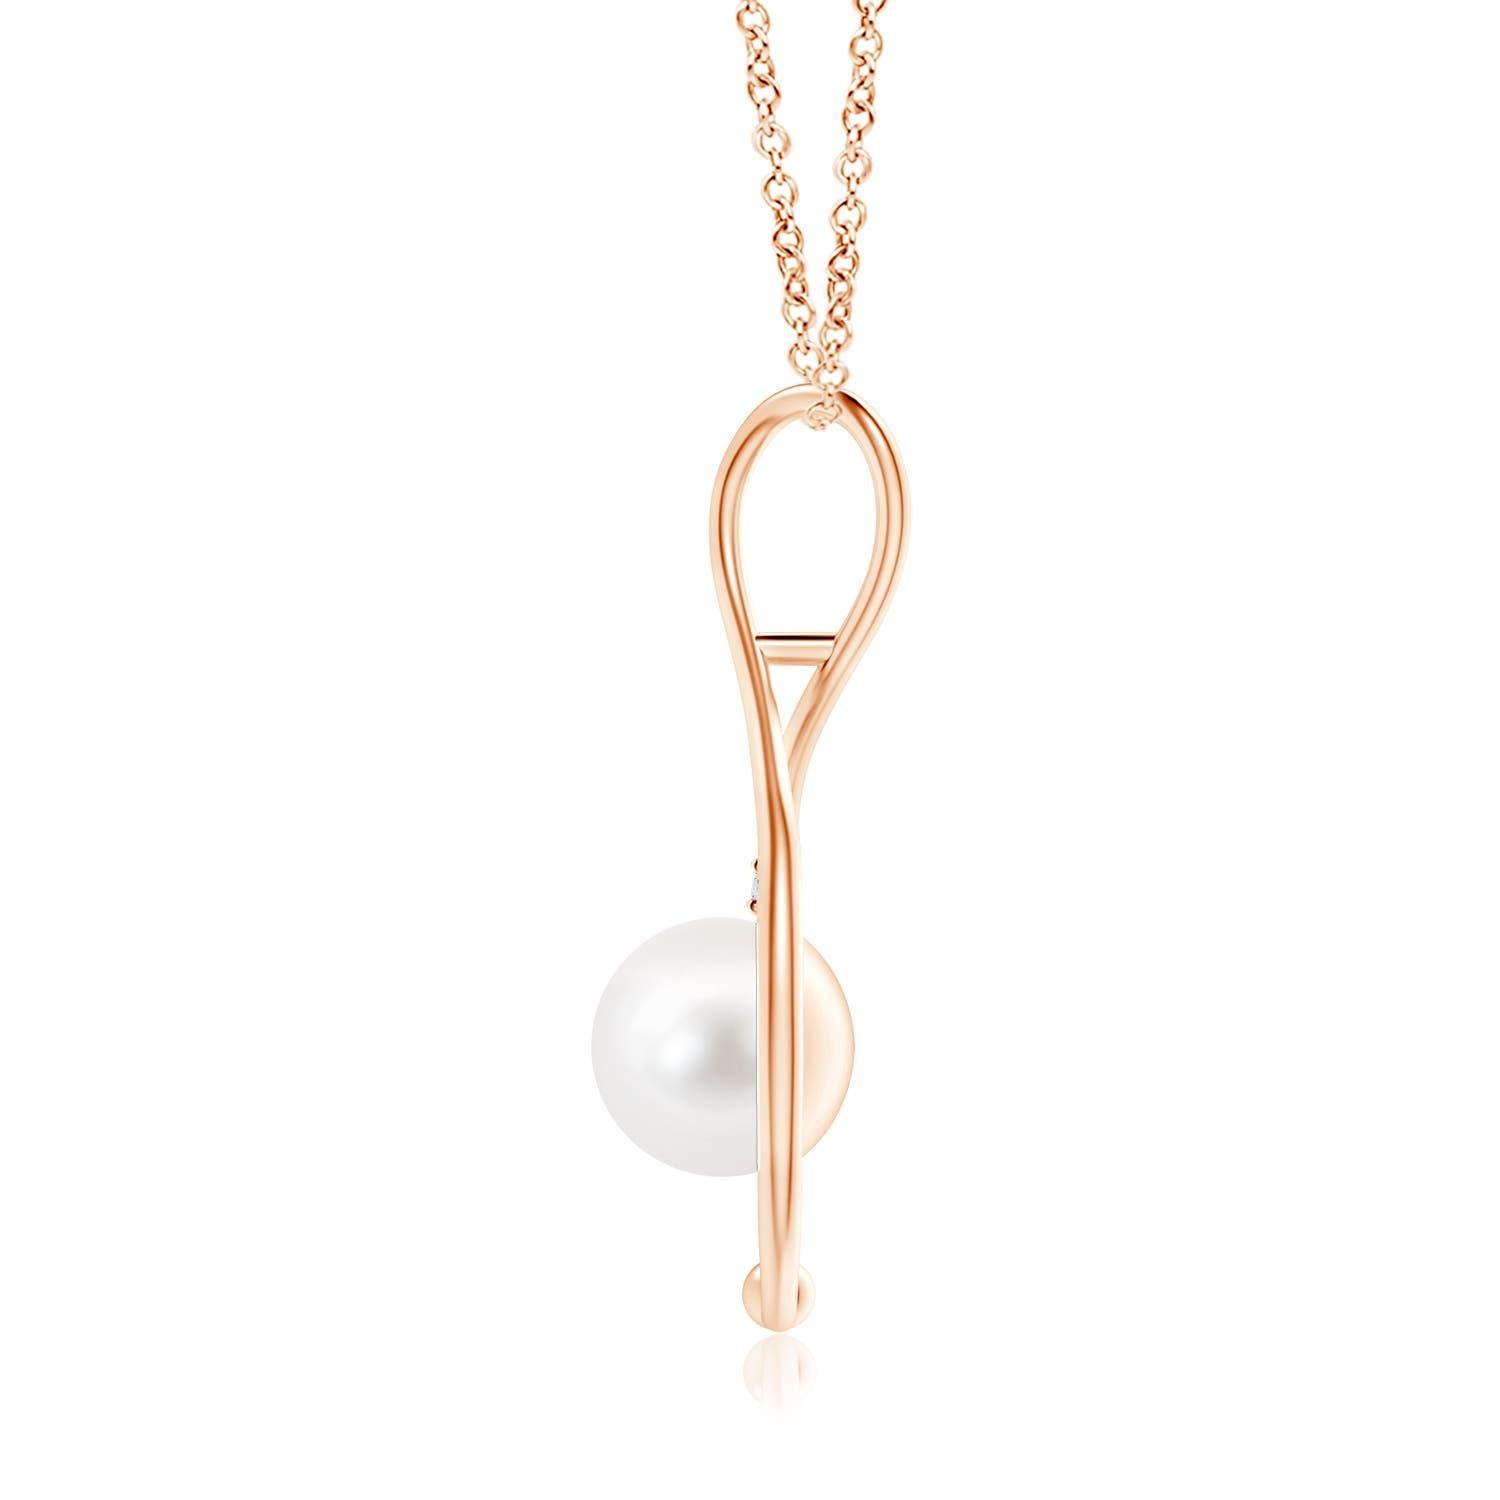 A modern classic, this pearl infinity necklace in 14K rose gold is a beautiful interpretation of the popular infinity symbol. The infinity loop softly cuddles the round Freshwater cultured pearl to evoke a feeling of tenderness. The glimmering